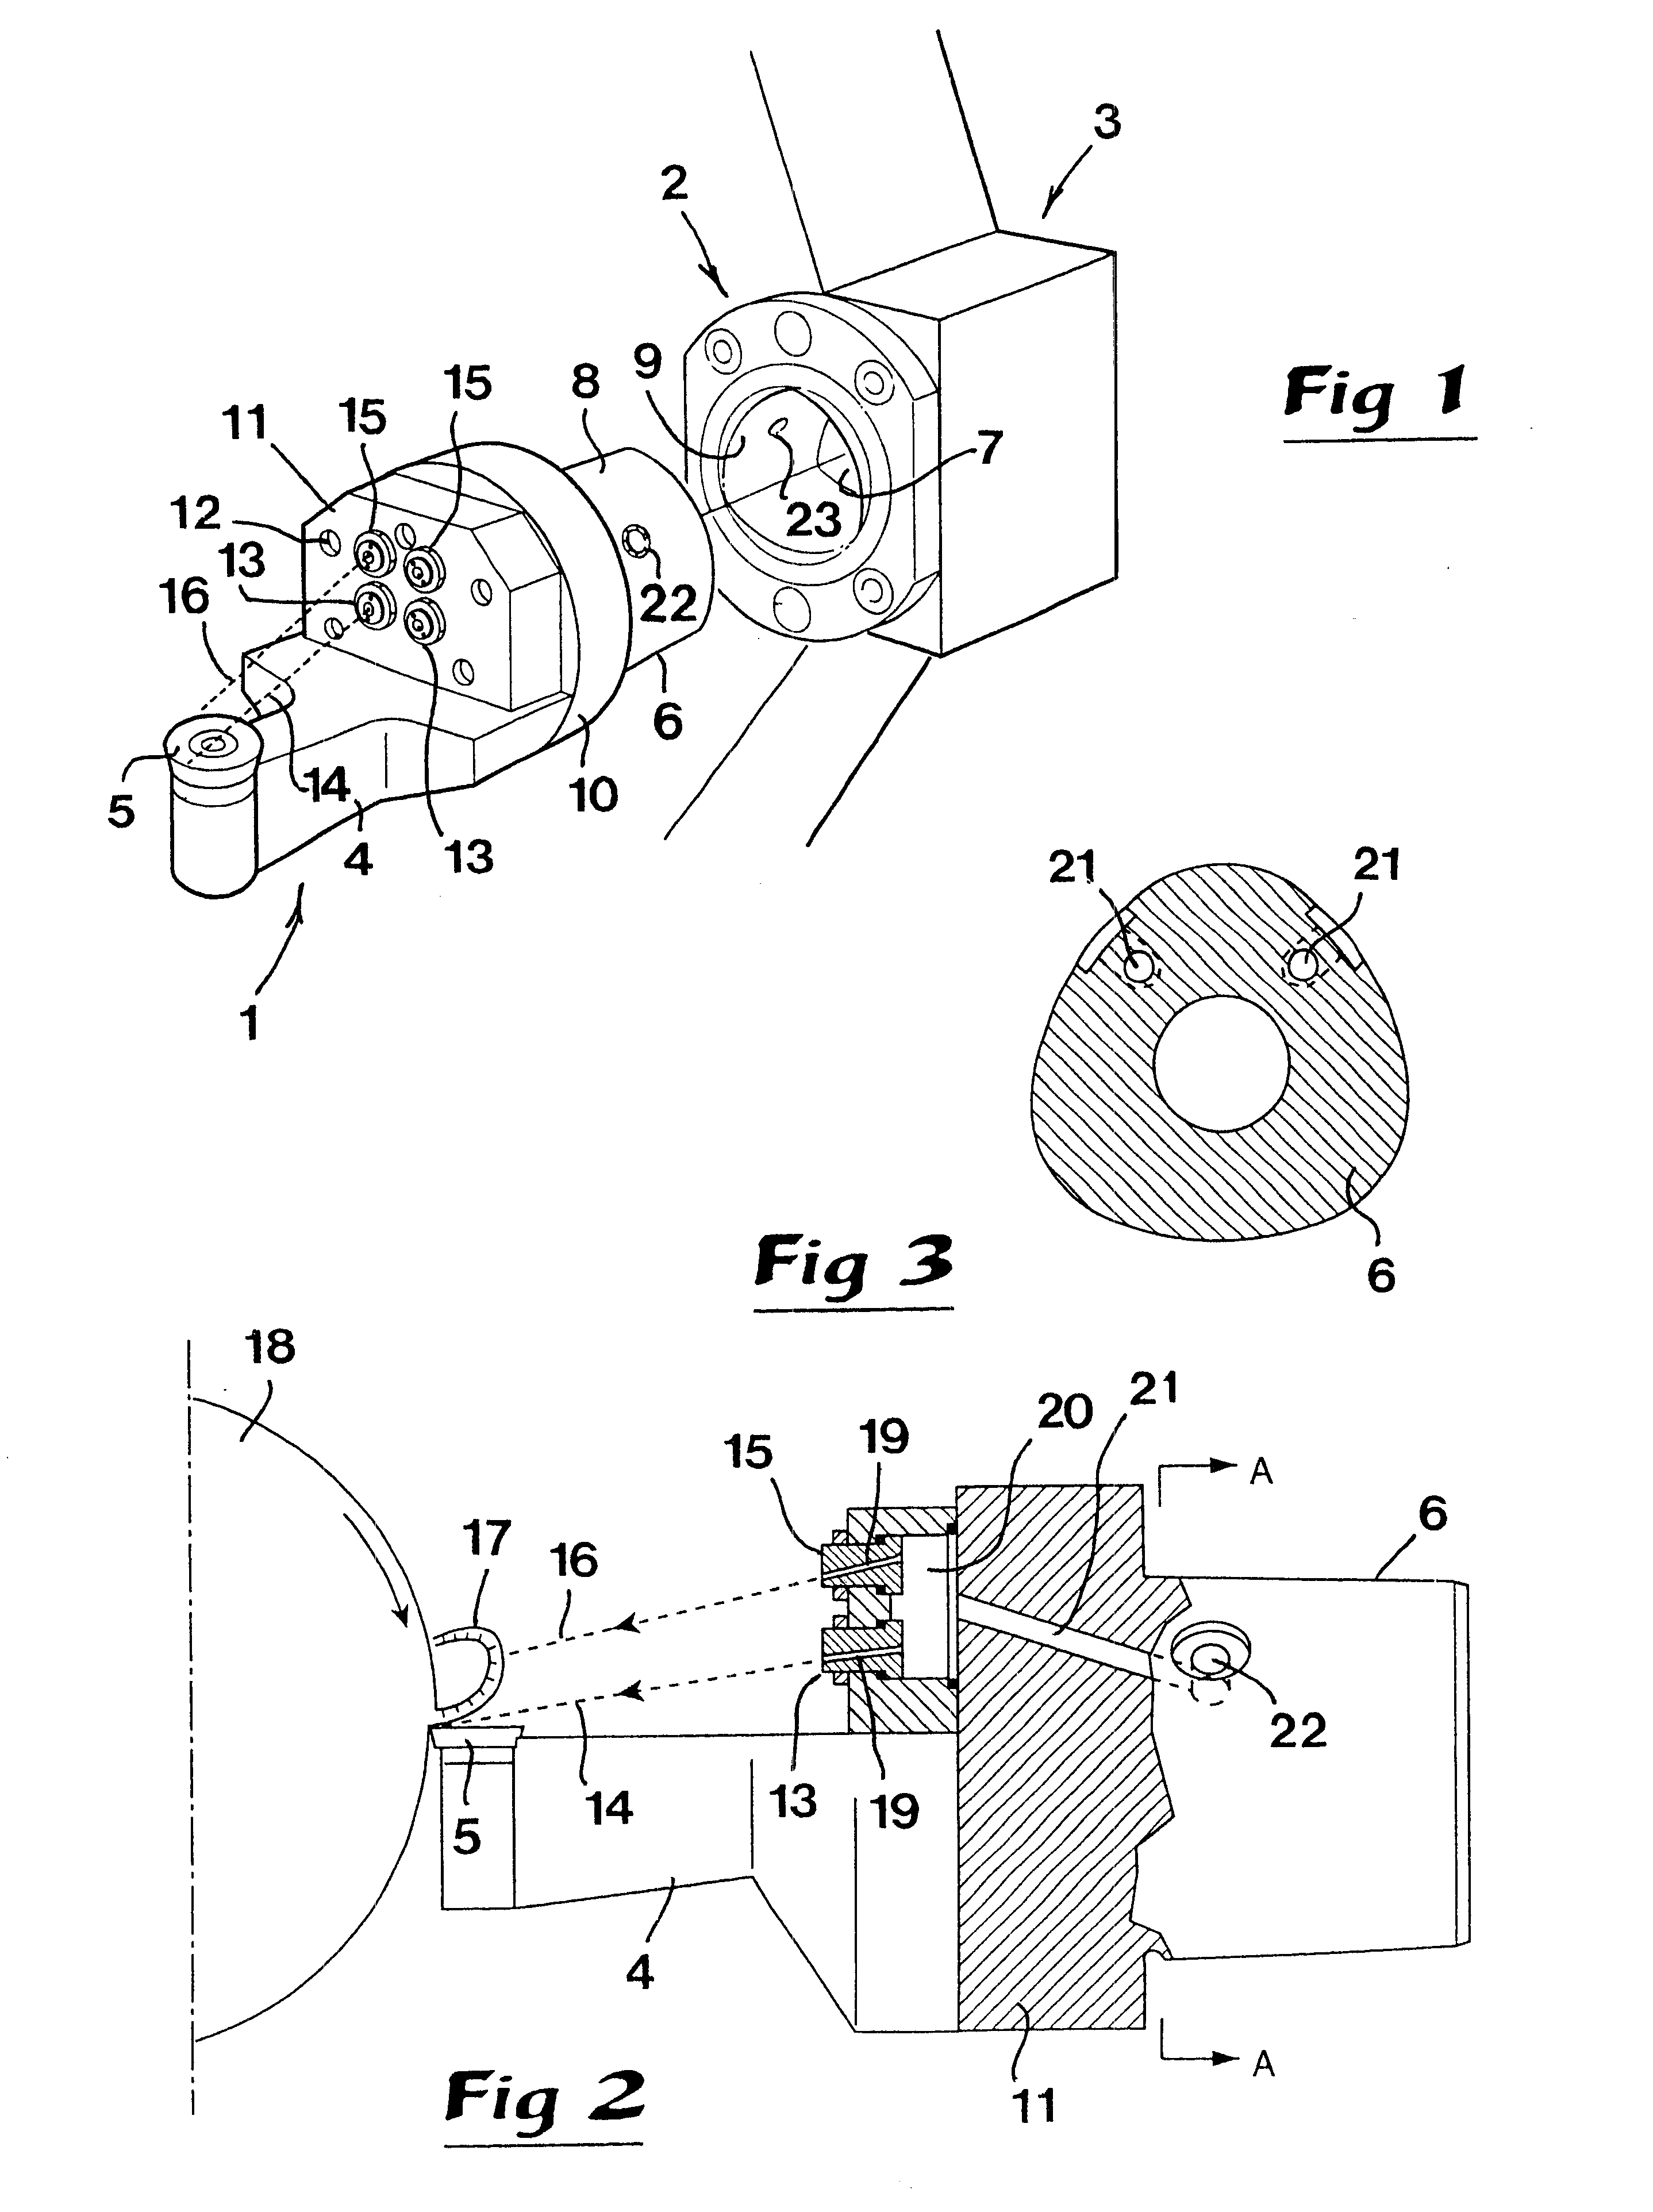 Cutting tool having liquid-spraying nozzles for controlling chip formation